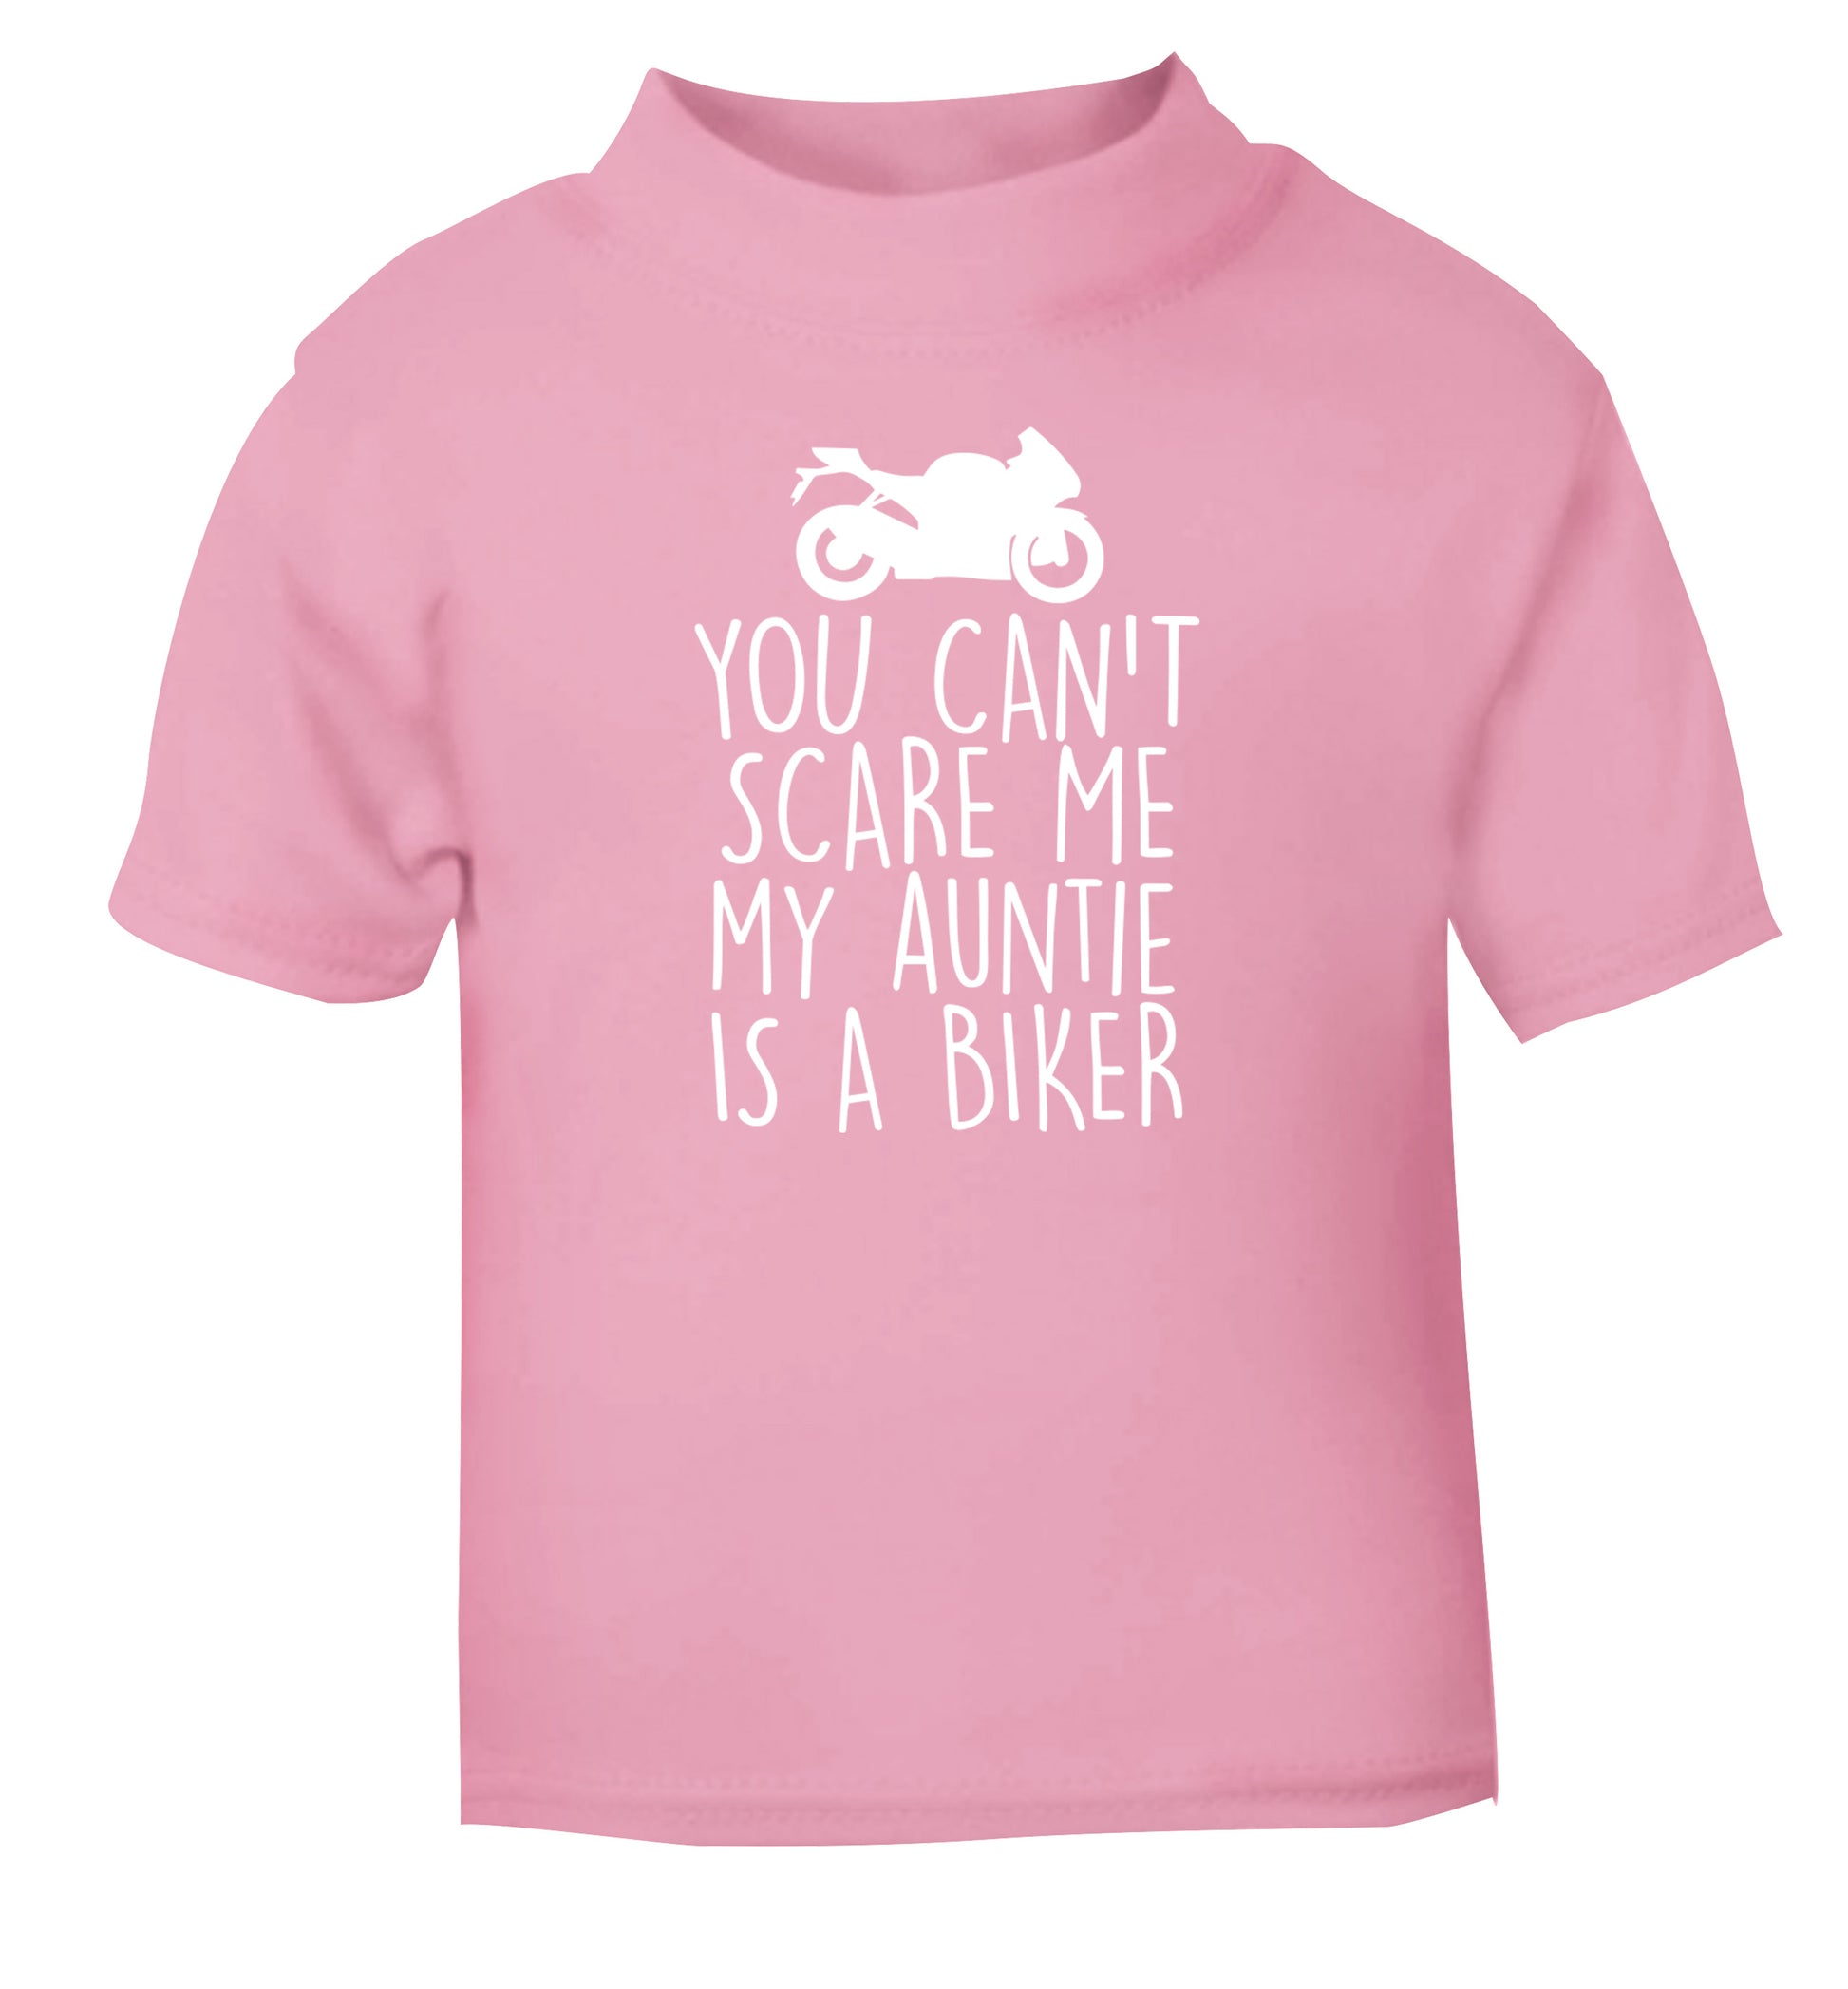 You can't scare me my auntie is a biker light pink Baby Toddler Tshirt 2 Years